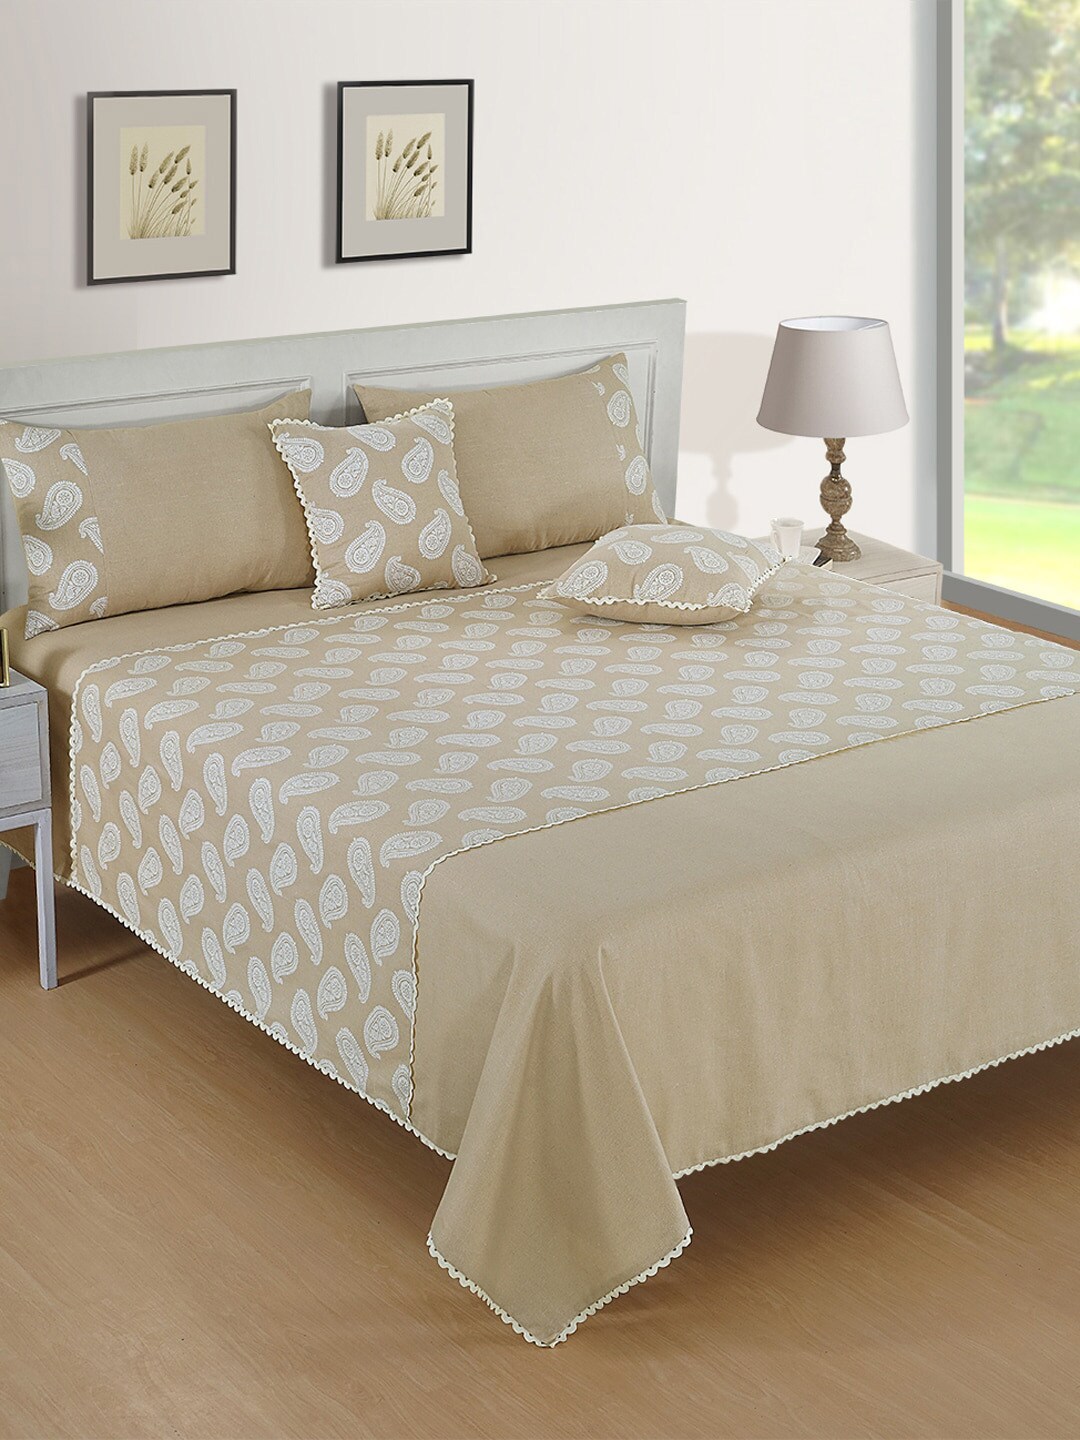 SWAYAM Set Of 5 Beige & White Ethnic Motifs 120TC Pure Cotton Bed Cover With Pillow & Cushion Covers Price in India